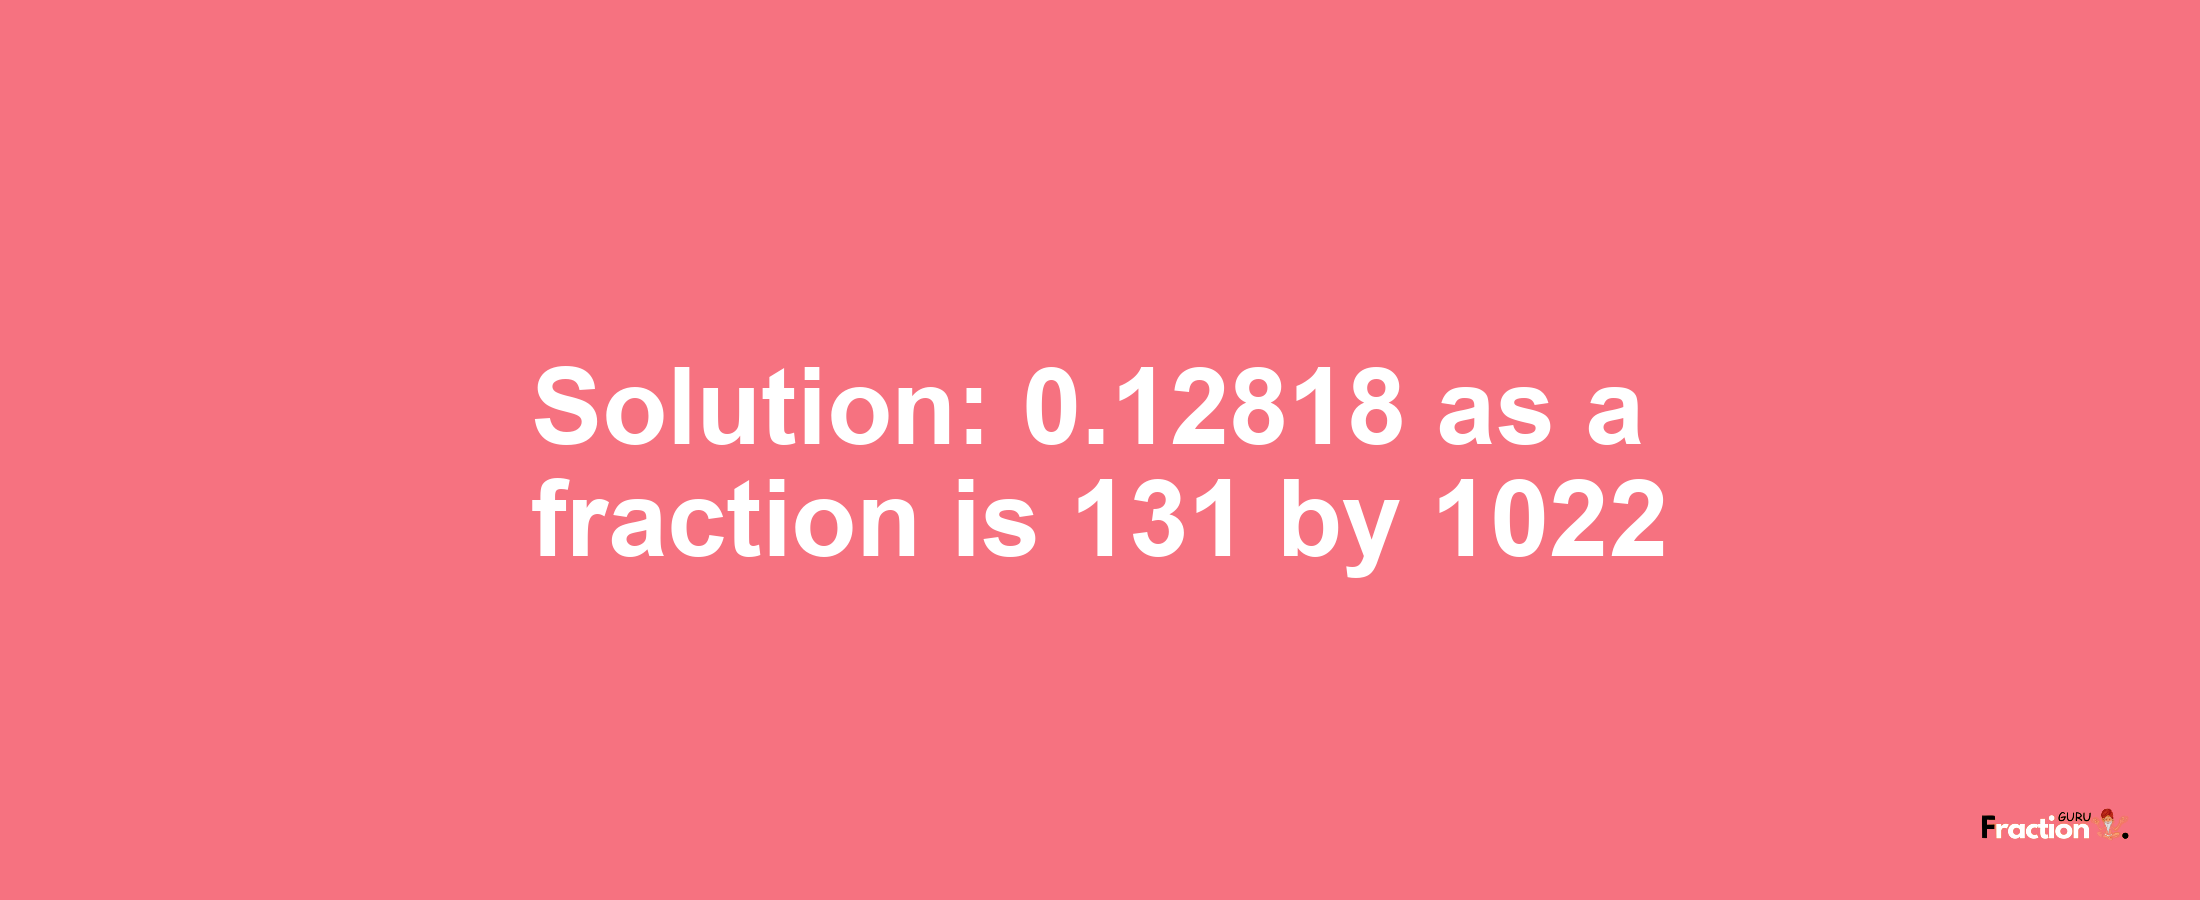 Solution:0.12818 as a fraction is 131/1022